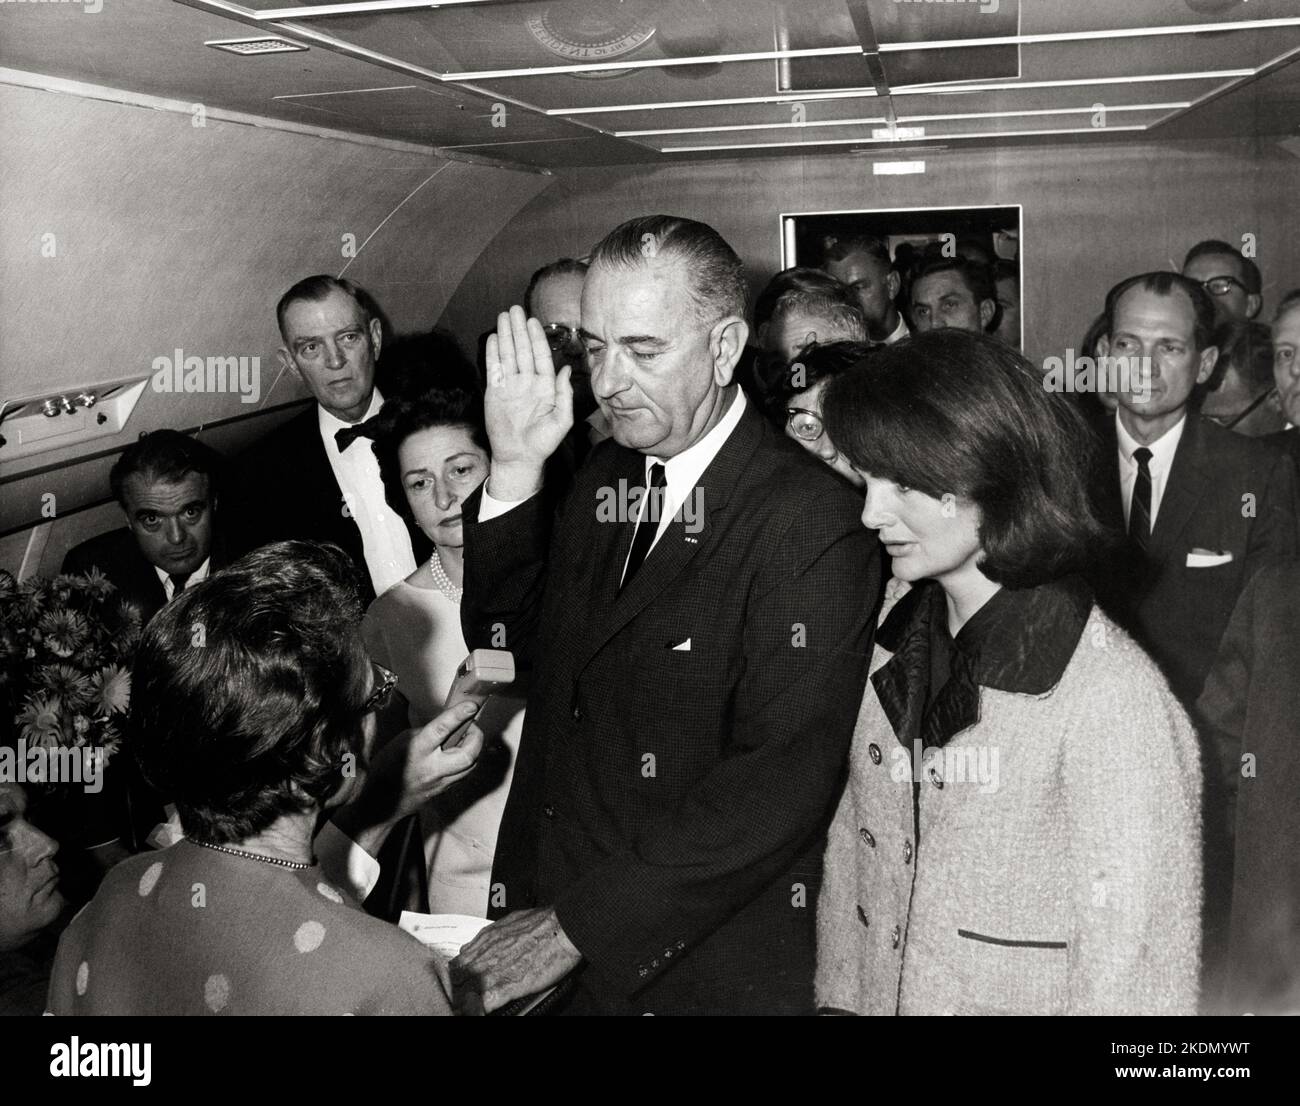 Lyndon B. Johnson taking the oath of office aboard Air Force One at Dallas Love Field, following the assassination of President John F. Kennedy earlier that day, November 22 1963 Stock Photo